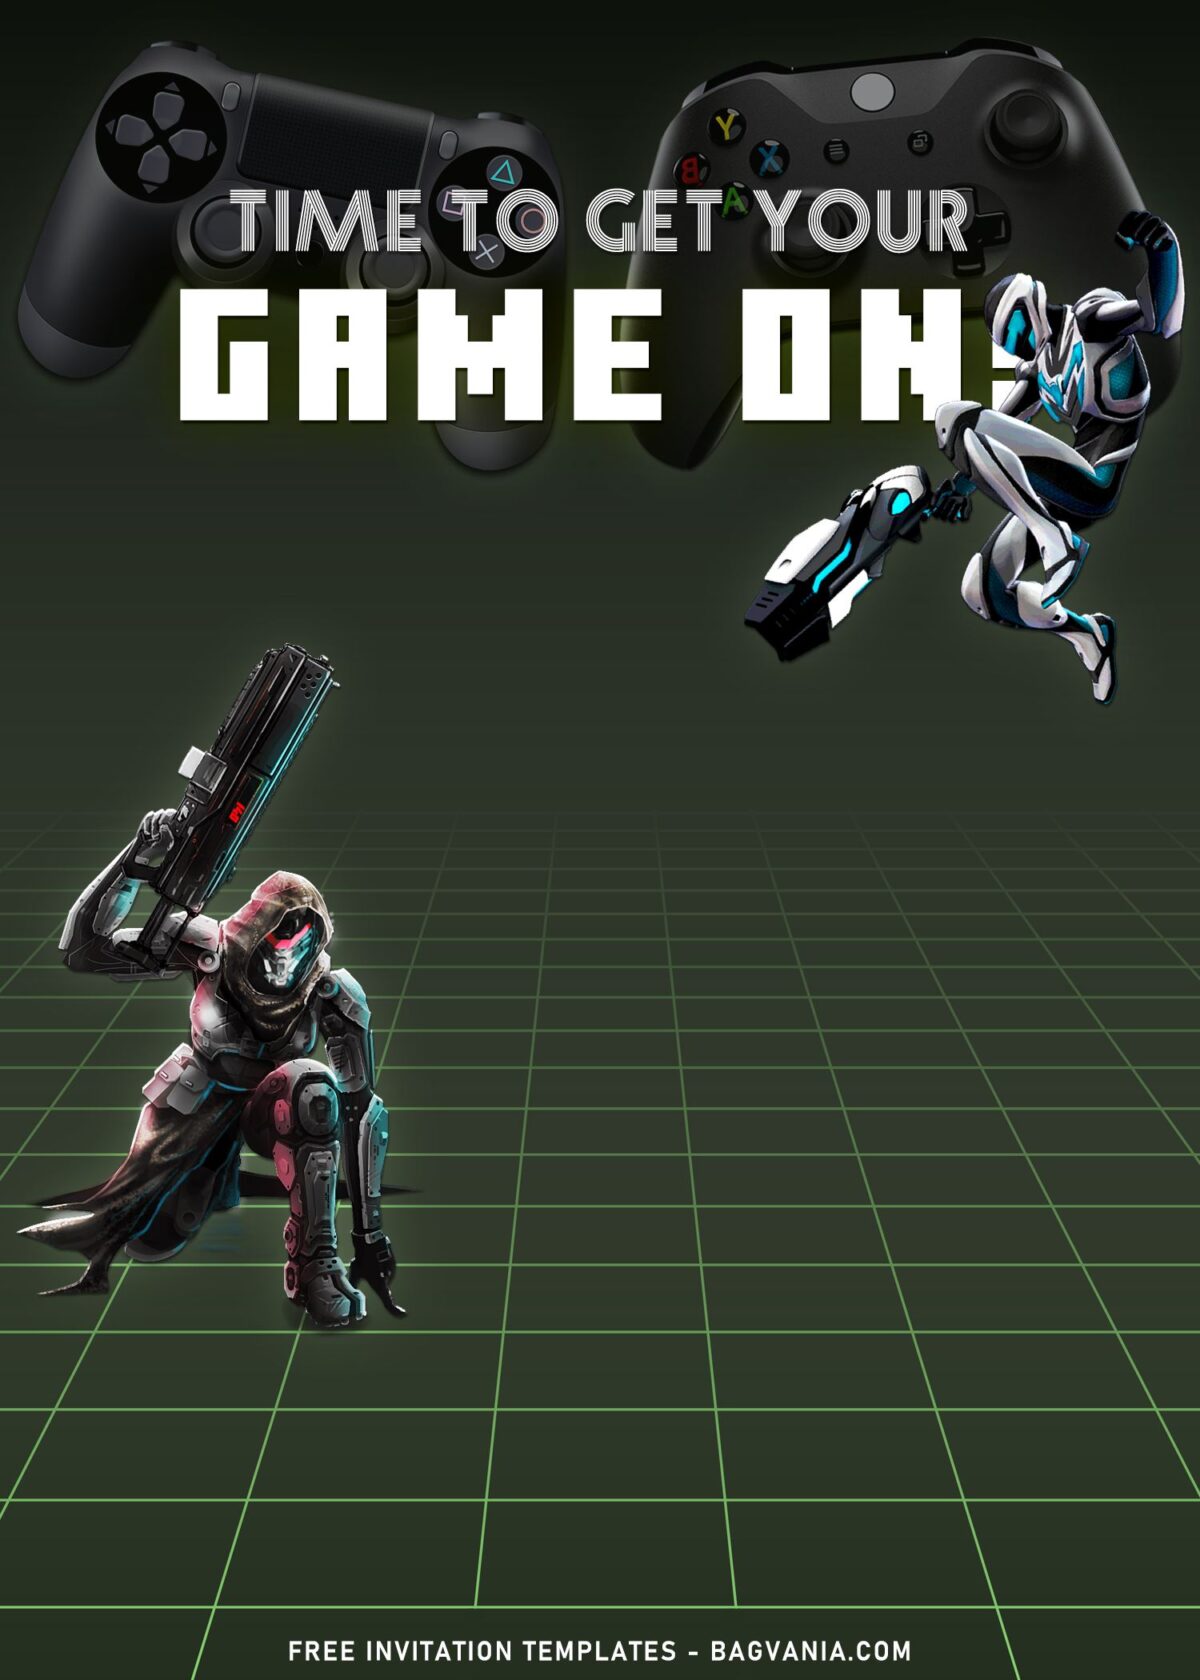 11+ Video Game Birthday Invitation Templates For Your Gamer's Birthday with cool robot